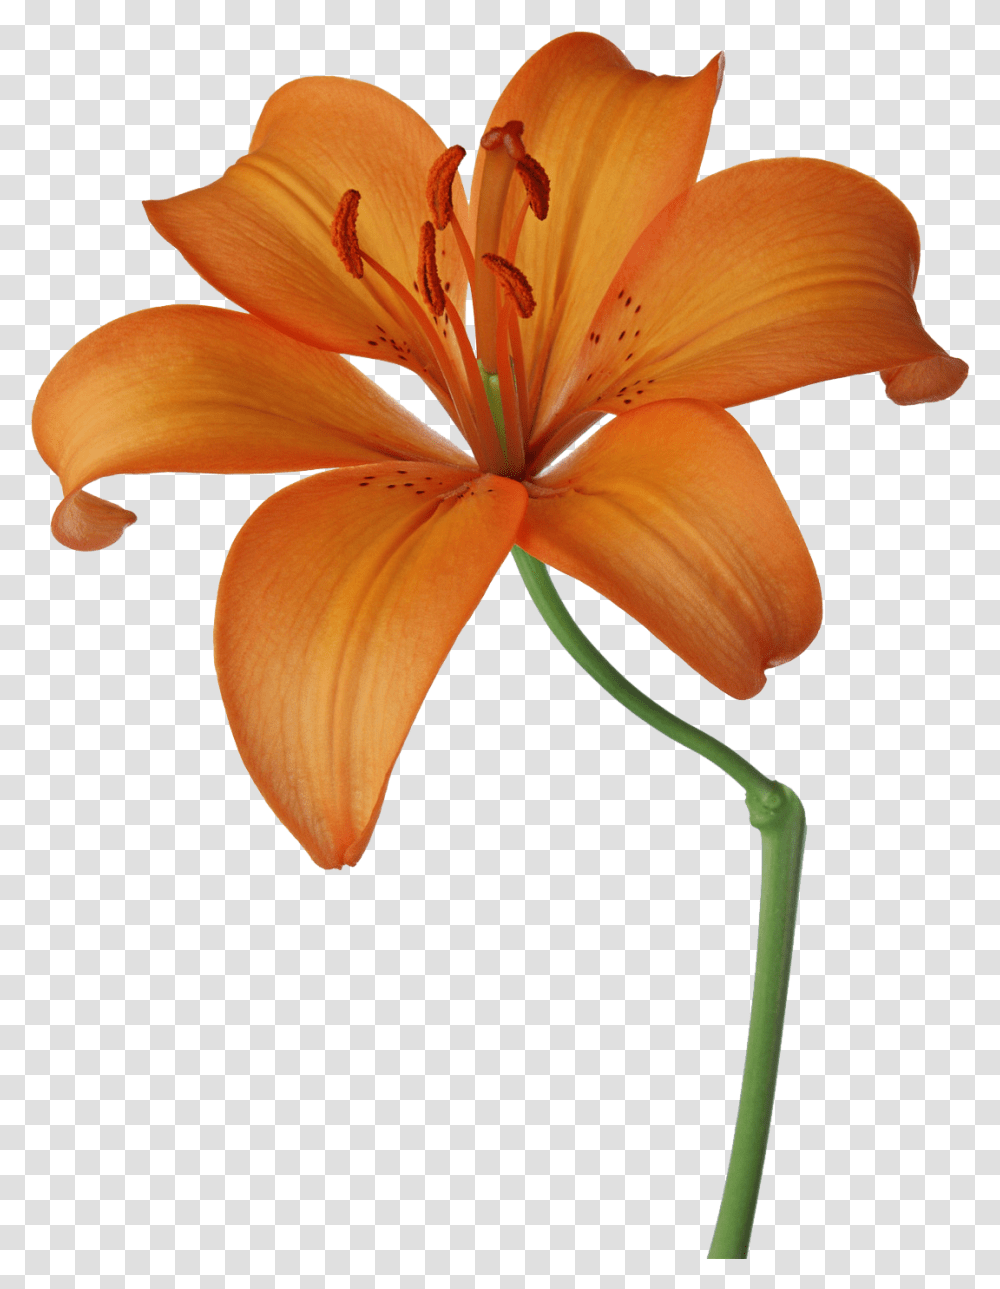 Download Lillies Drawing Orange Lily Orange Lily Flower, Plant, Blossom, Fungus, Pollen Transparent Png